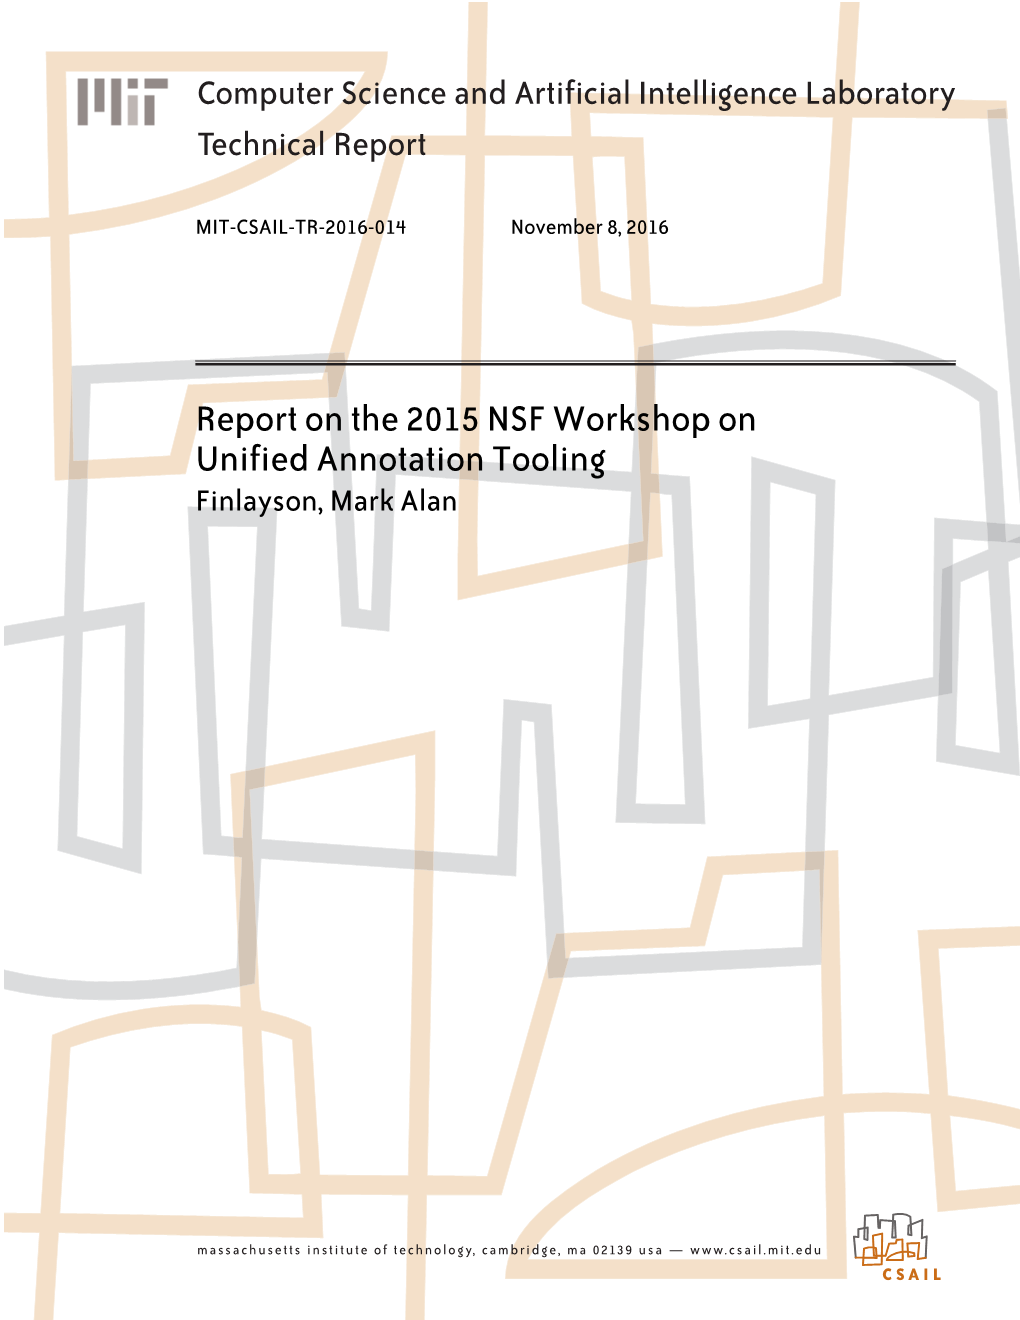 Report on the 2015 NSF Workshop on Unified Annotation Tooling Finlayson, Mark Alan